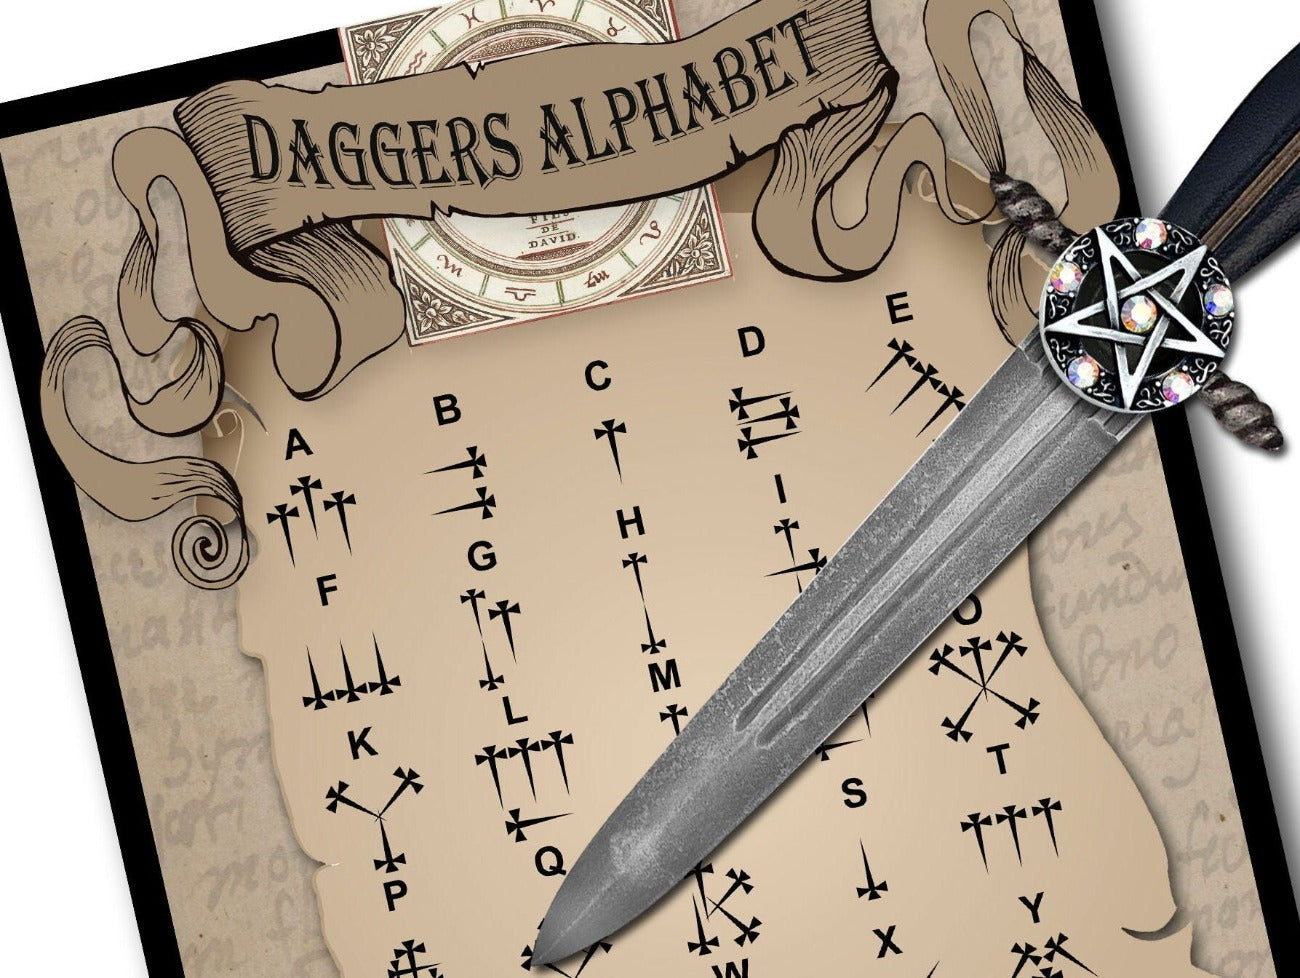 DAGGERS ALPHABET, Witchcraft Magical Secret Script, For Writing Spells and Rituals, close-up view - Morgana Magick Spell